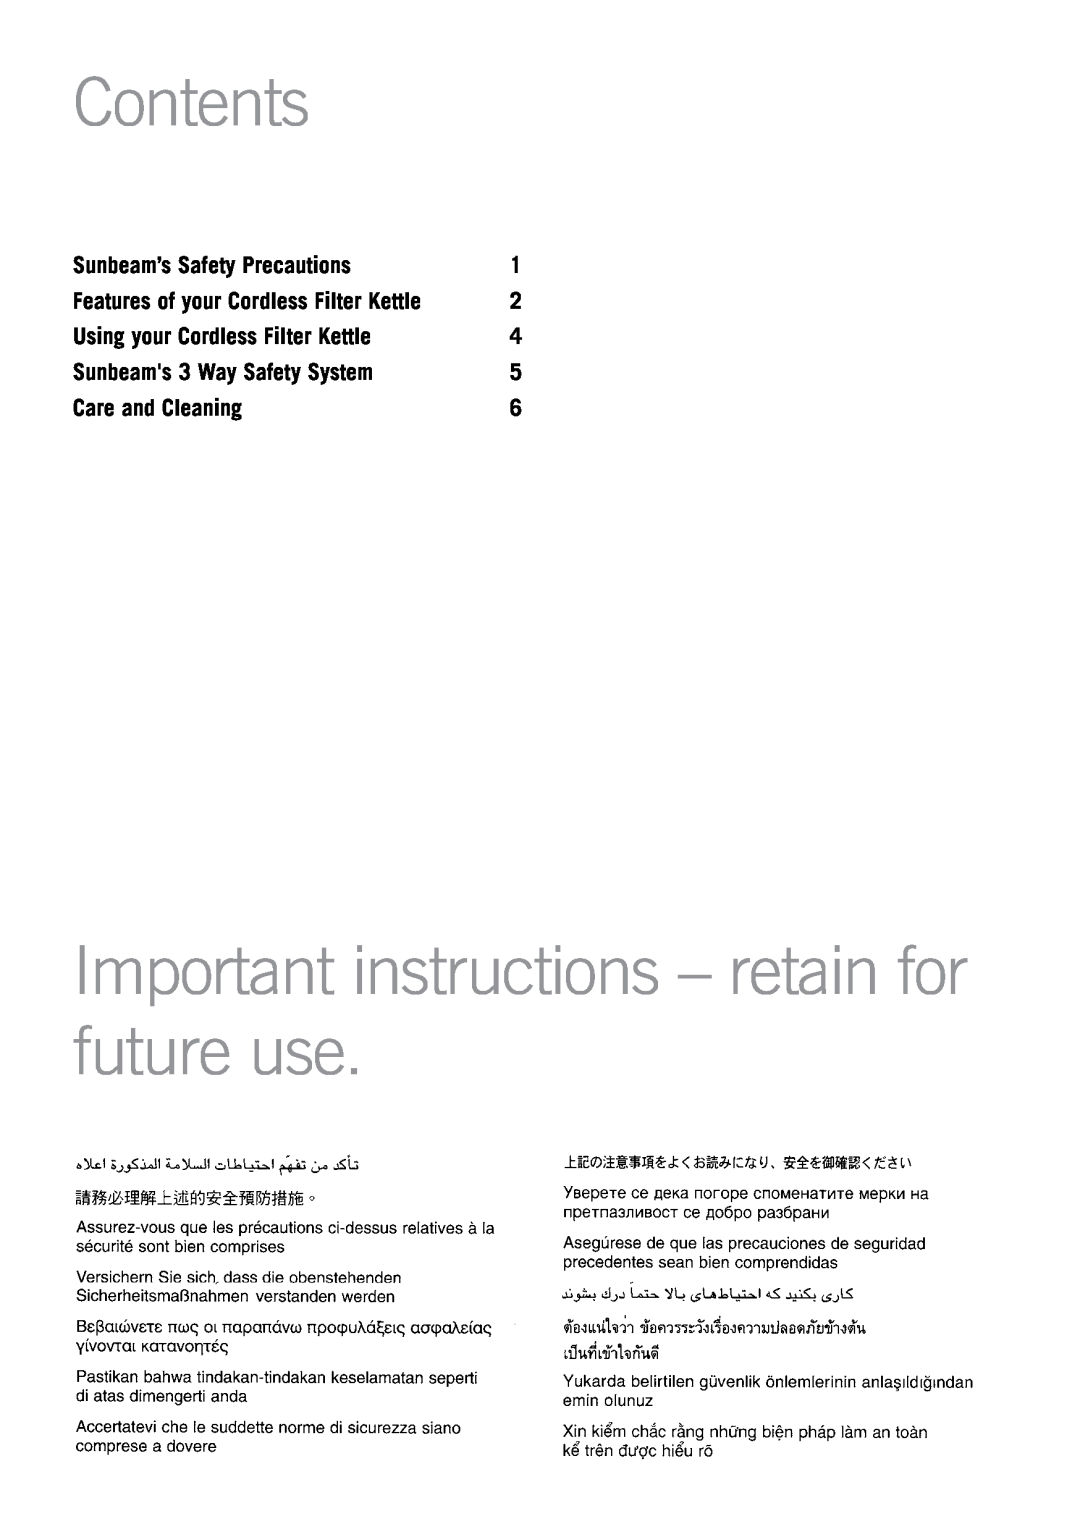 Sunbeam KE2350 Contents, Important instructions - retain for future use, Sunbeam’s Safety Precautions, Care and Cleaning 